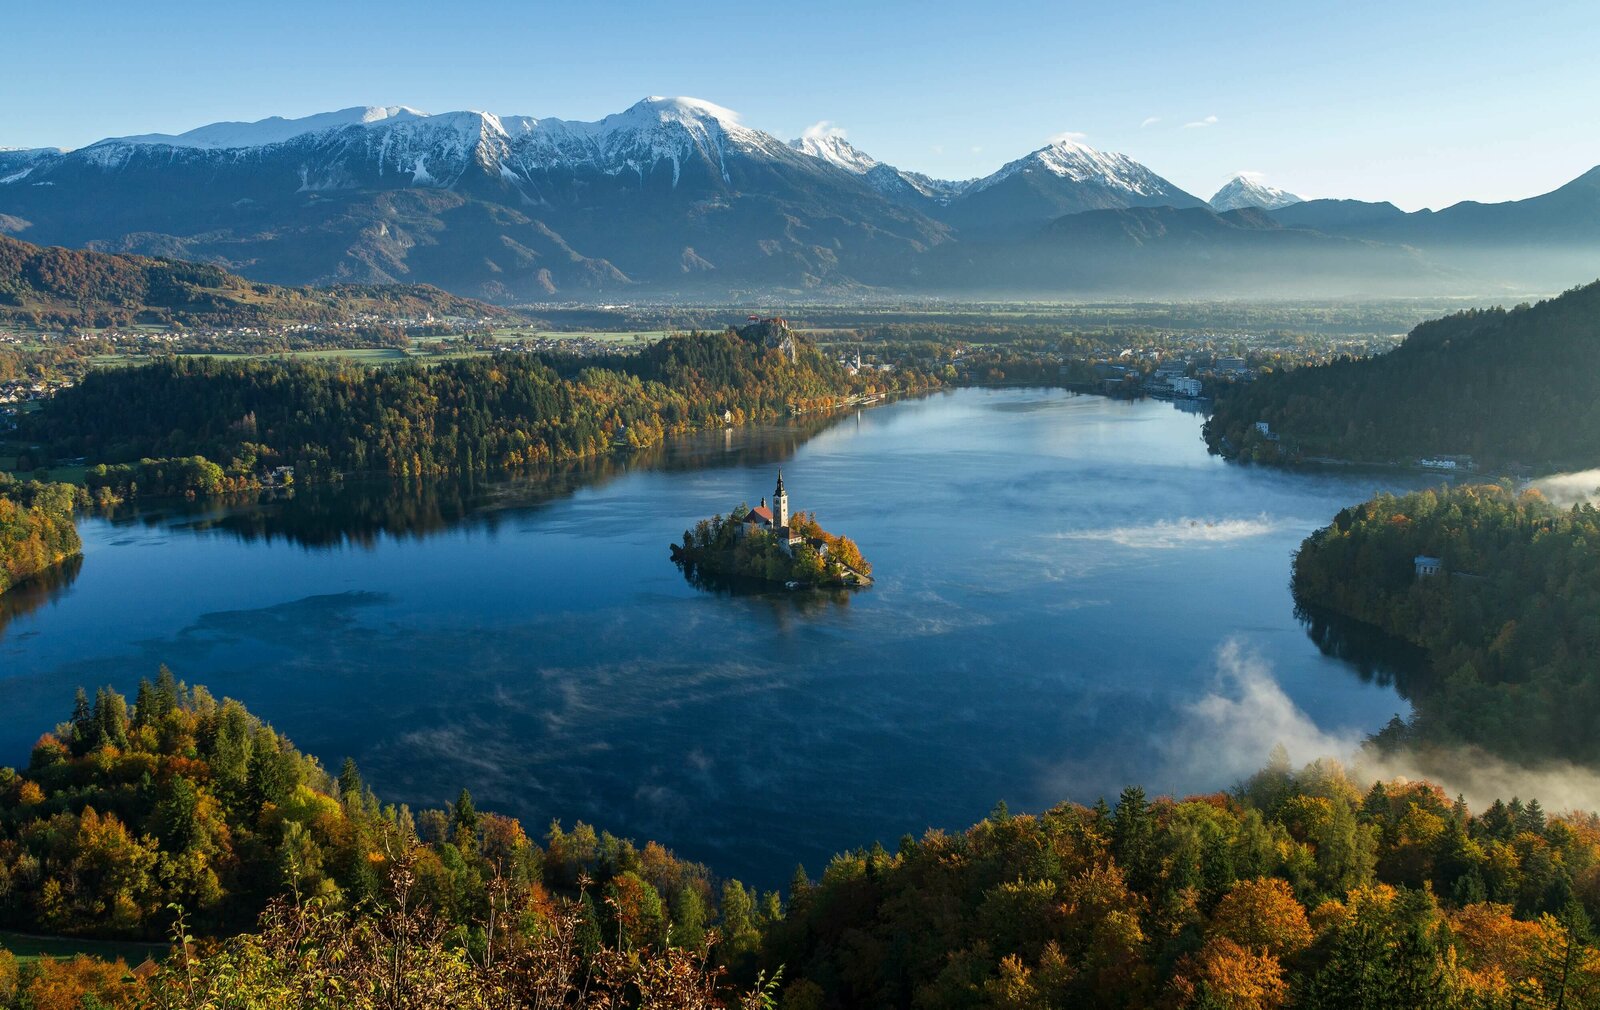 Lake Bled Activities: From viewpoints, hikes, and beyond